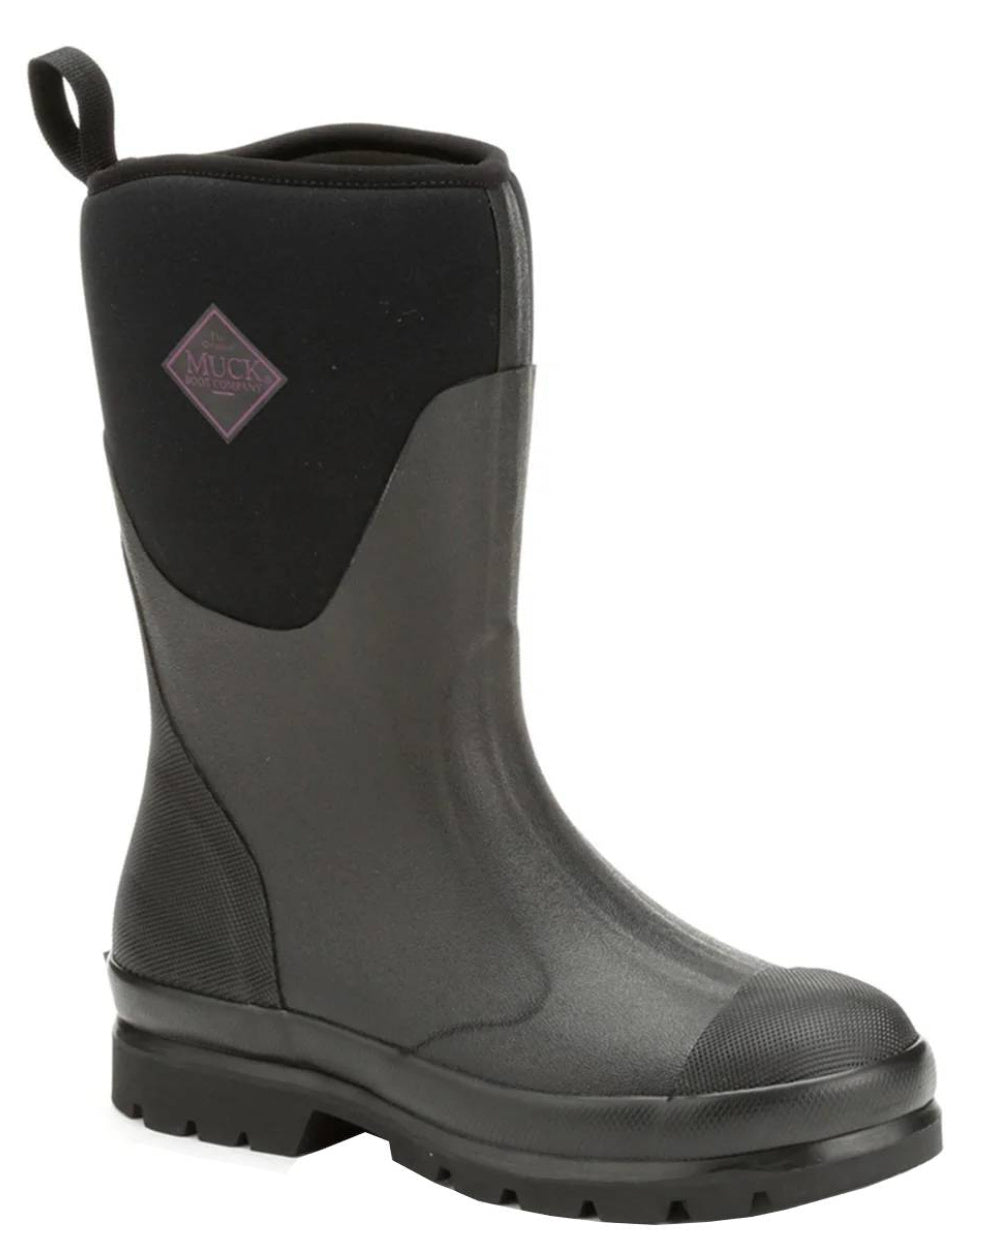 Black Coloured Muck Boots Womens Chore Classic Mid Wellingtons On A White Background